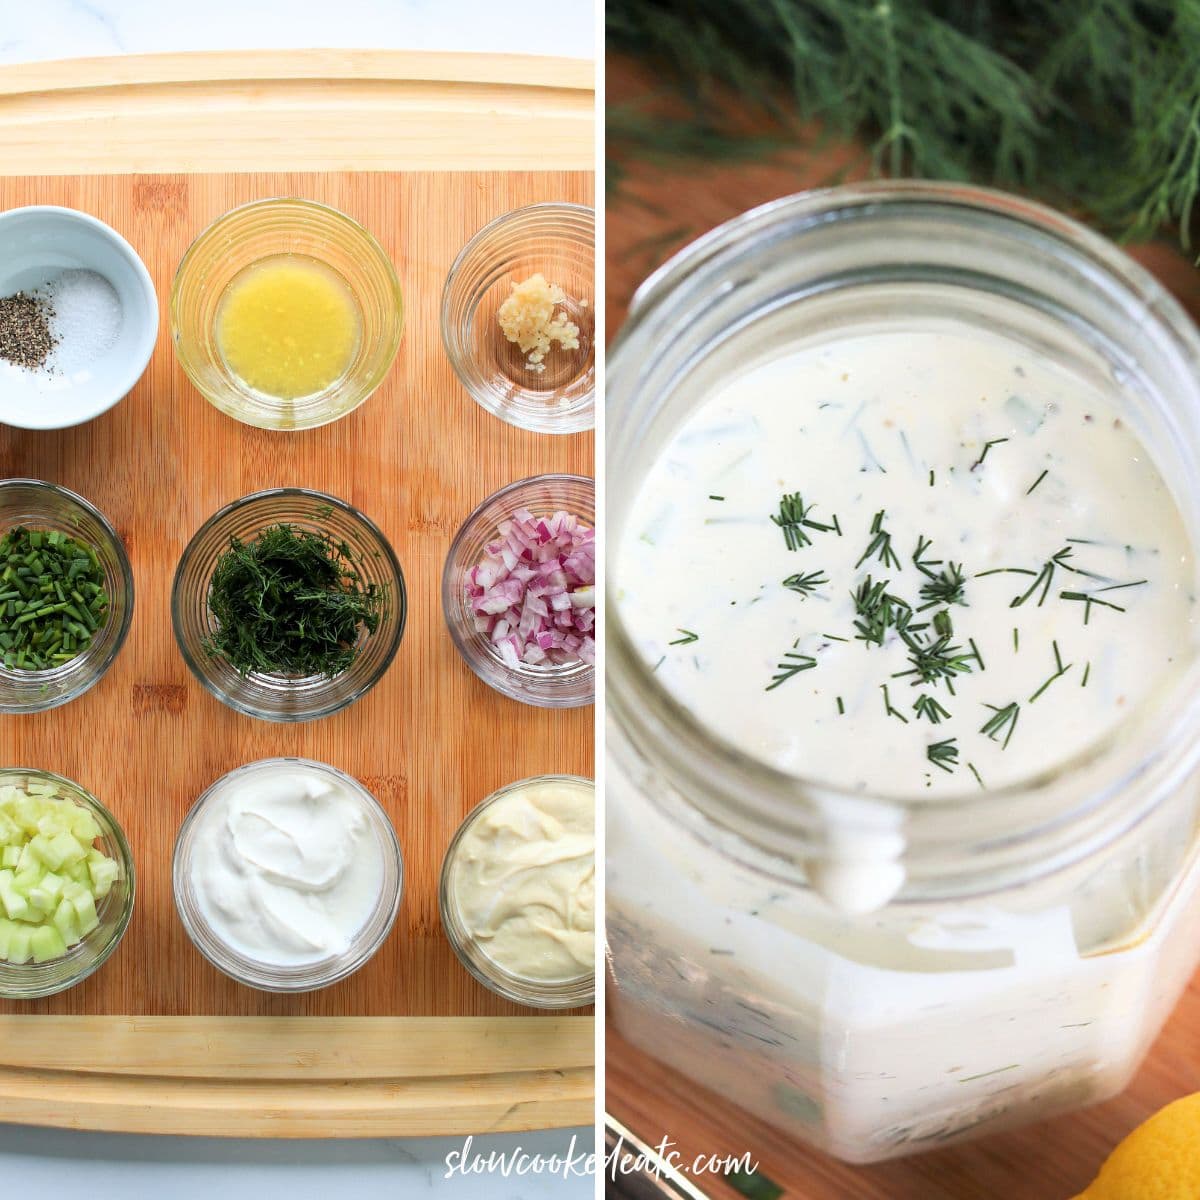 Ingredients needed for dill sauce and a jar of dill sauce.